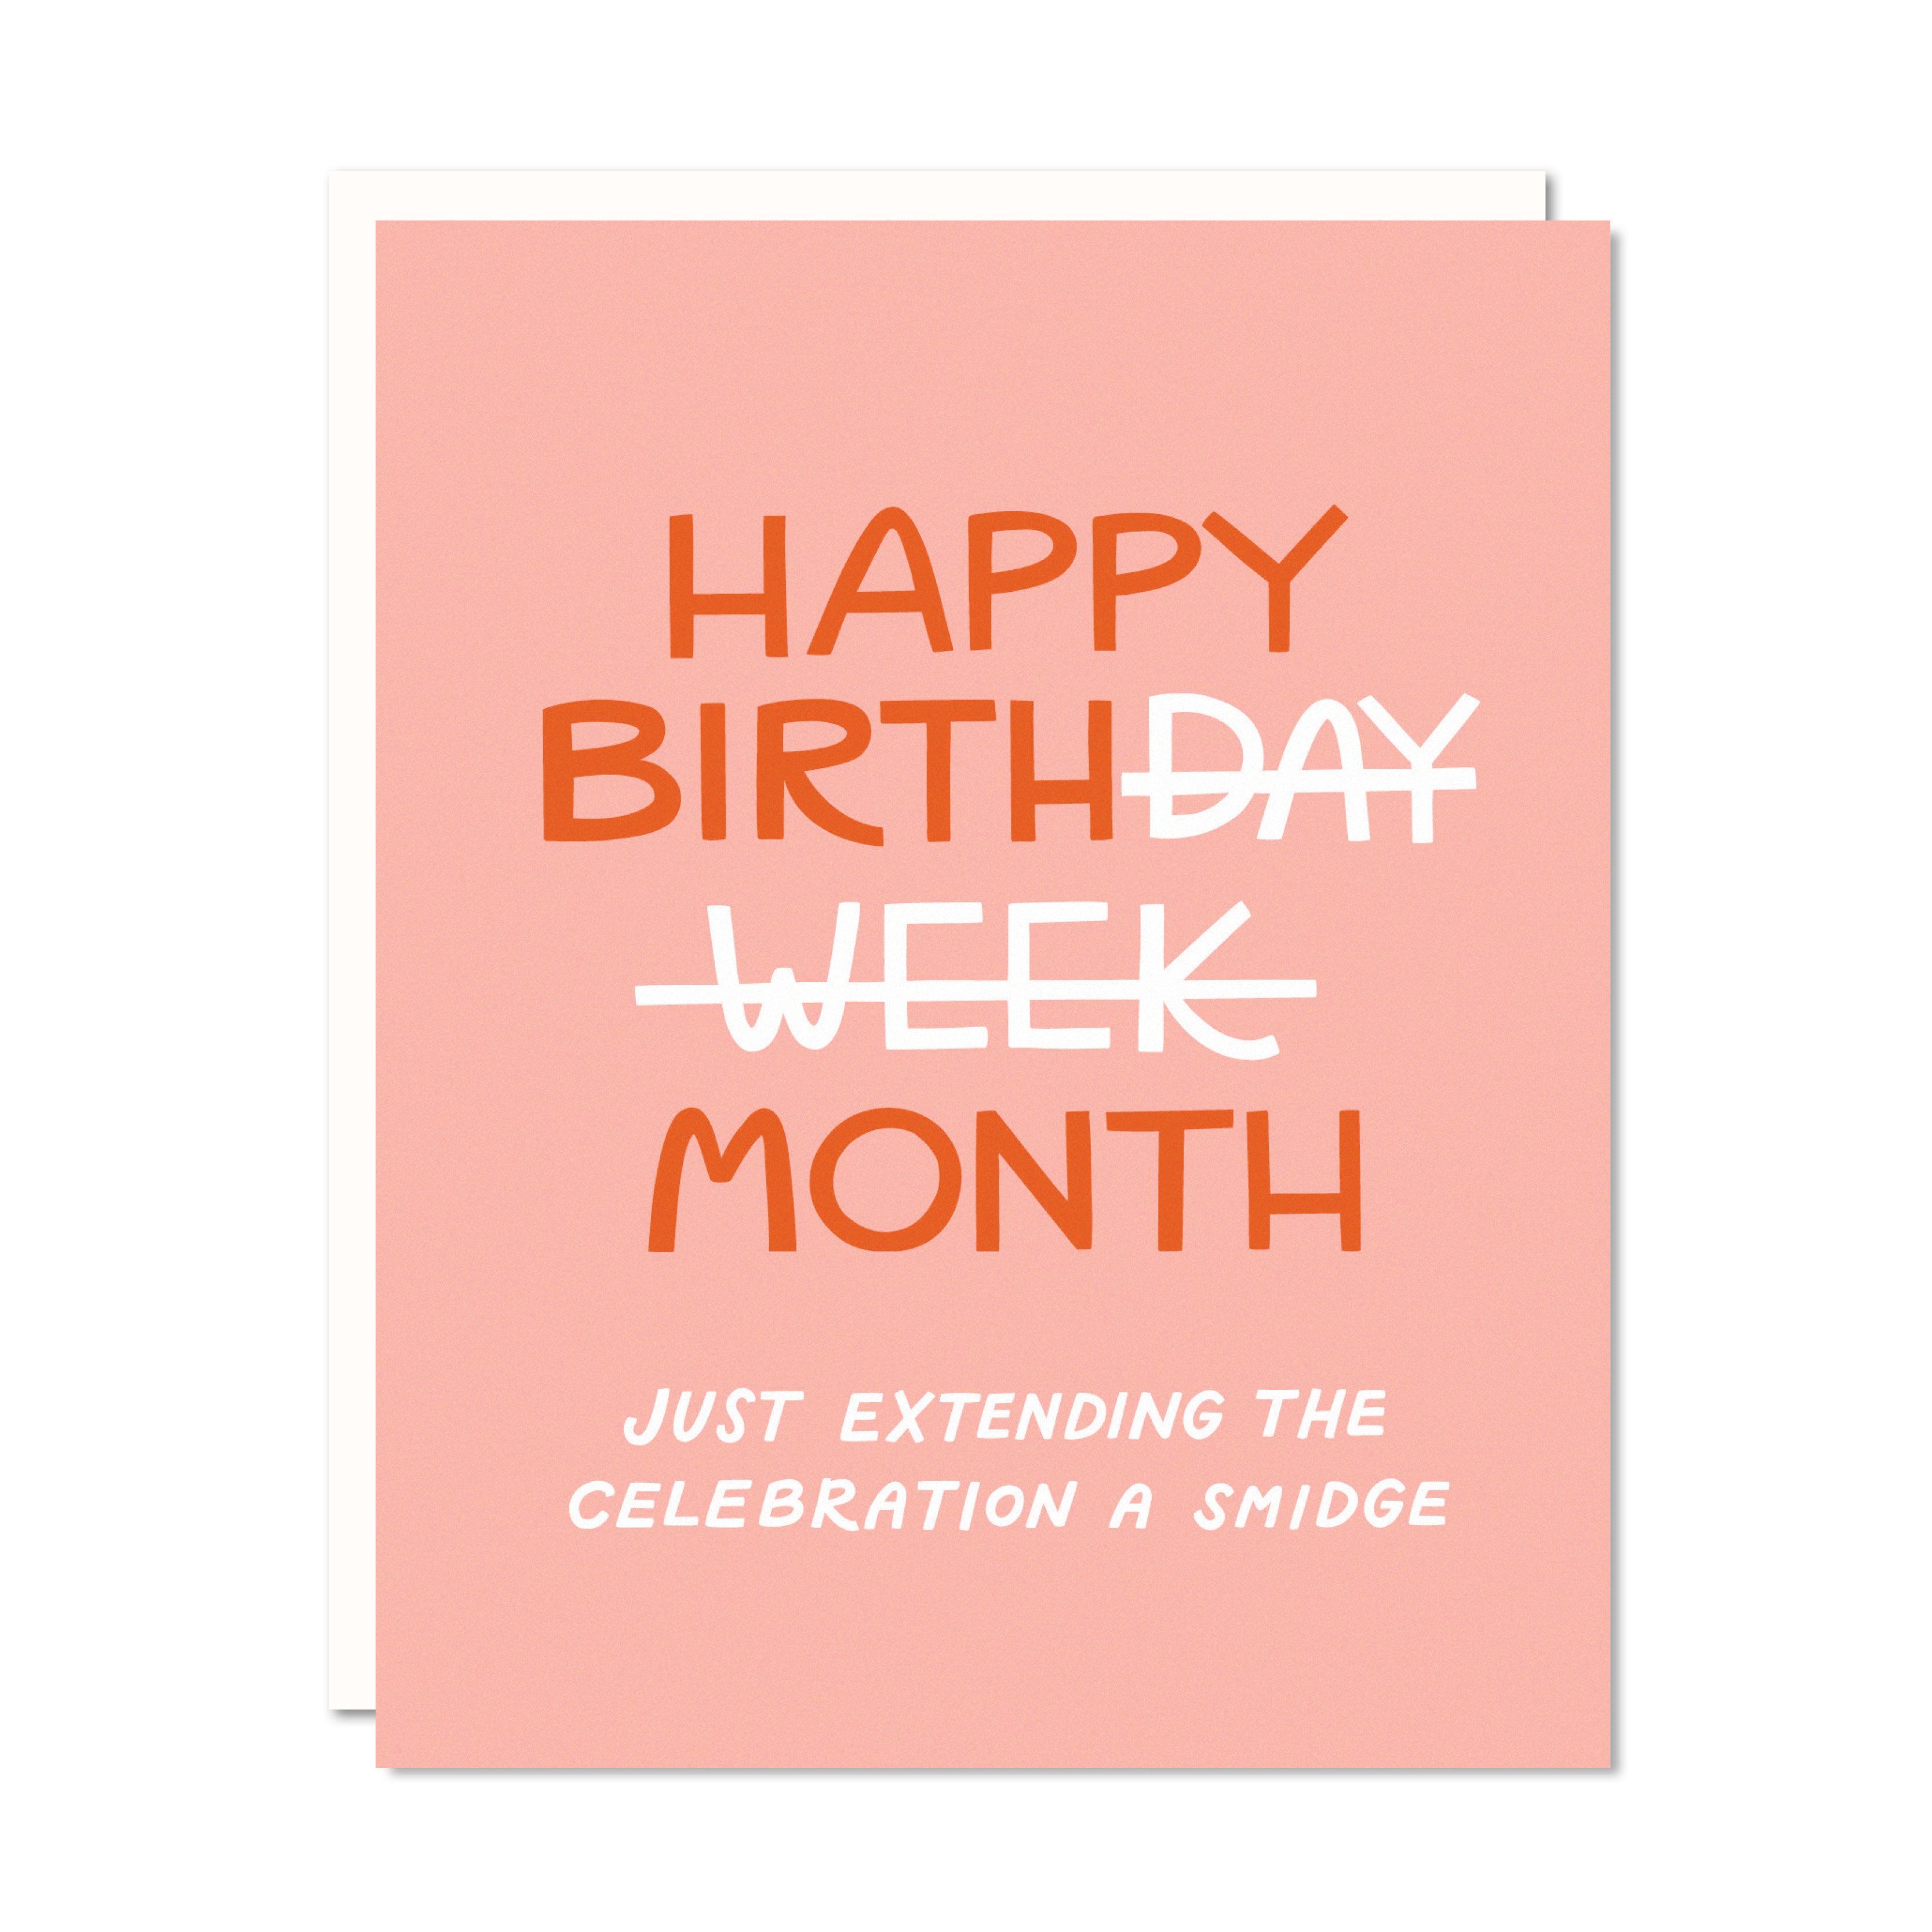 Paper　Greeting　Card　Daughter　Birthday　Odd　Co　Belated　Month!　Birth　–